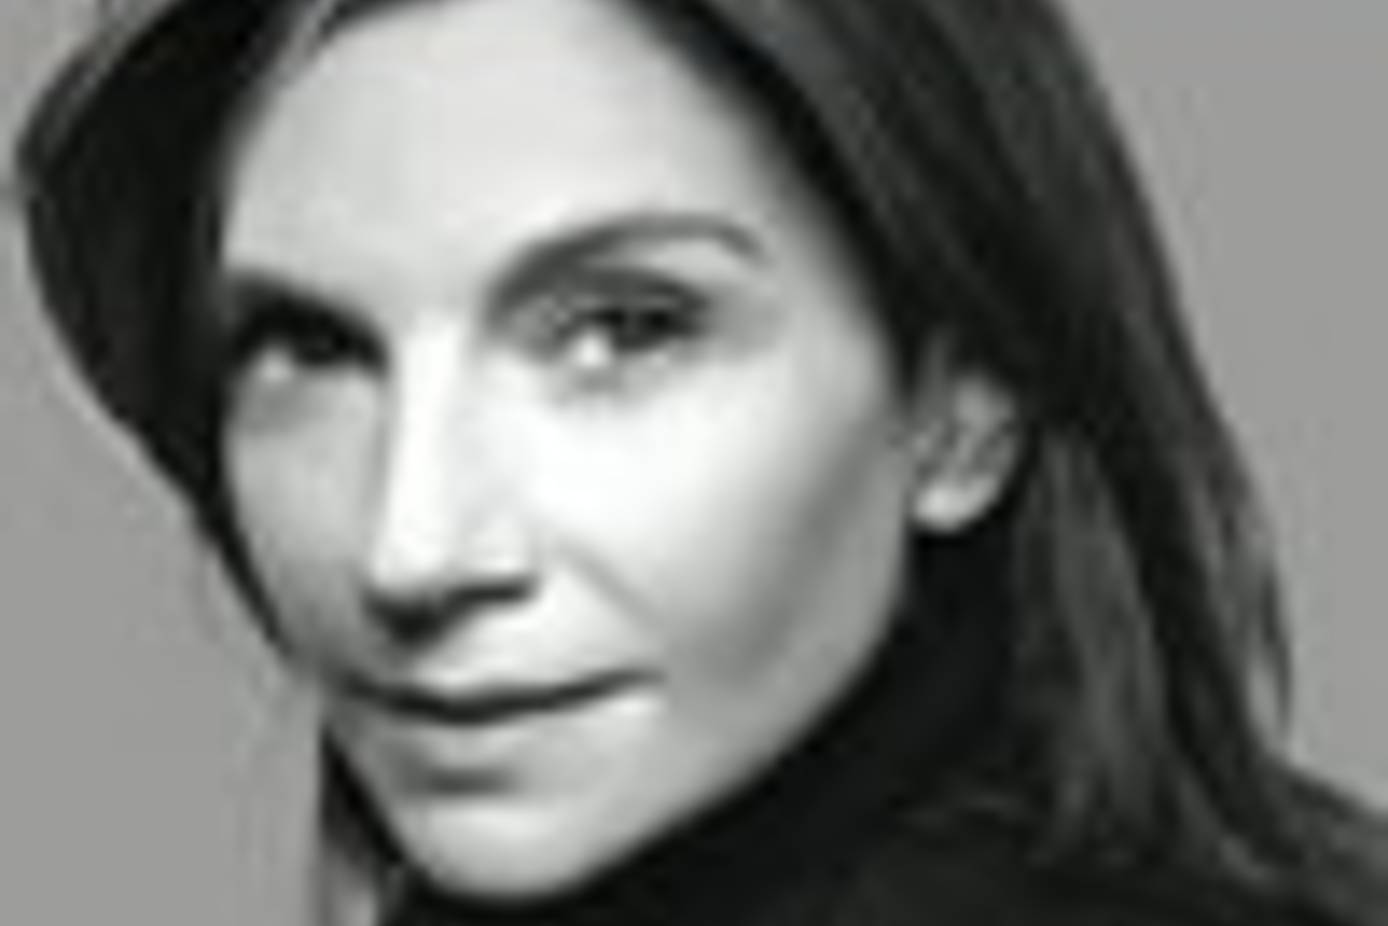 Phoebe Philo, Natalie Massenet Are the Fashion Forces on 'Time